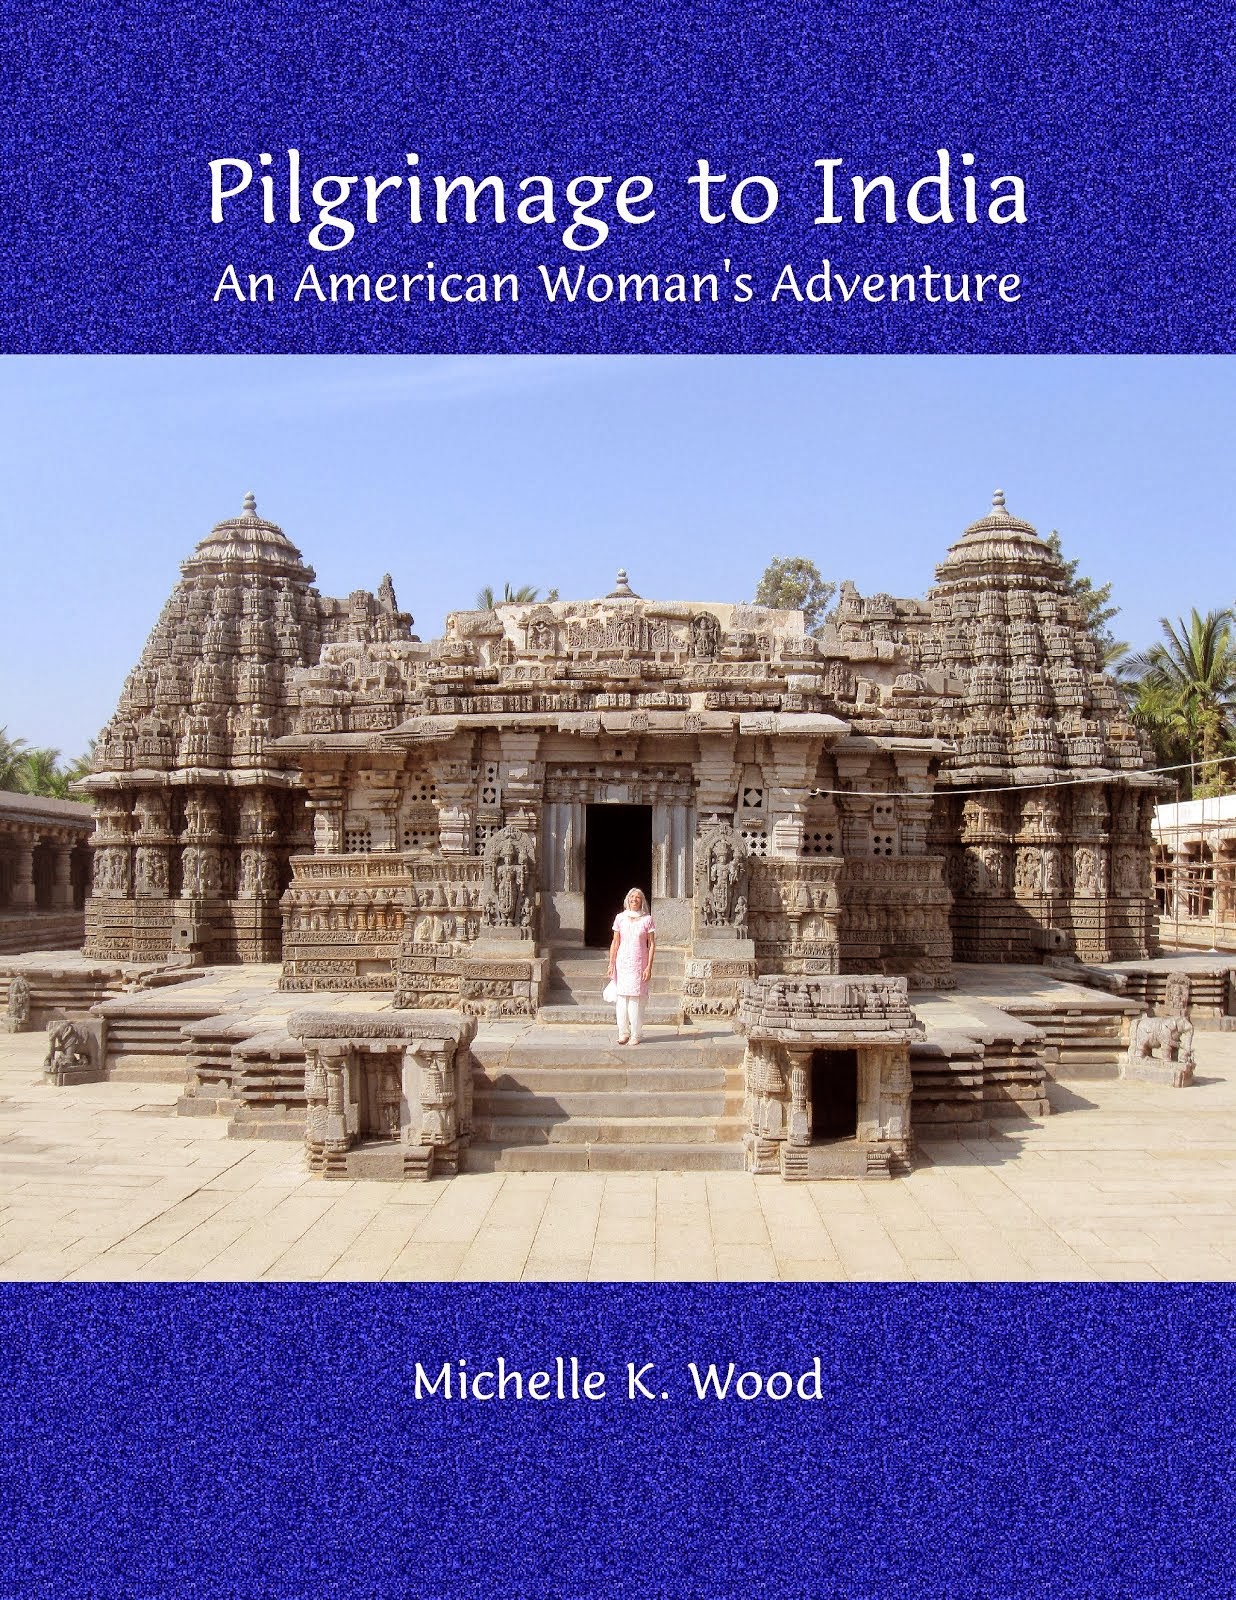 Book: Pilgrimage To India: An American Woman's Adventure